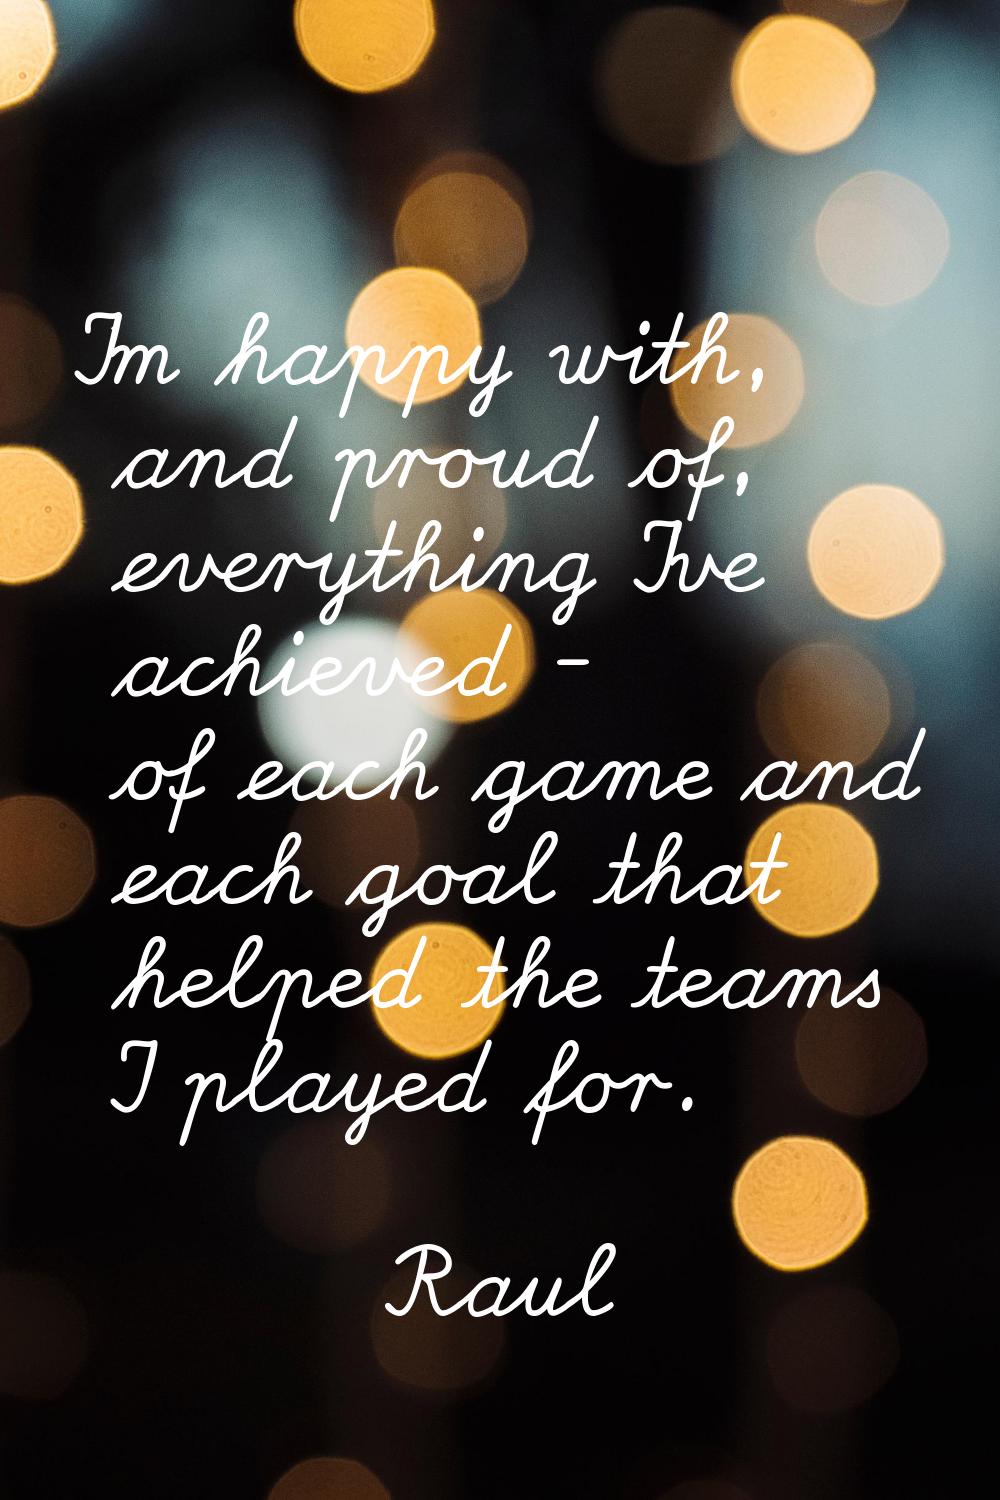 I'm happy with, and proud of, everything I've achieved - of each game and each goal that helped the